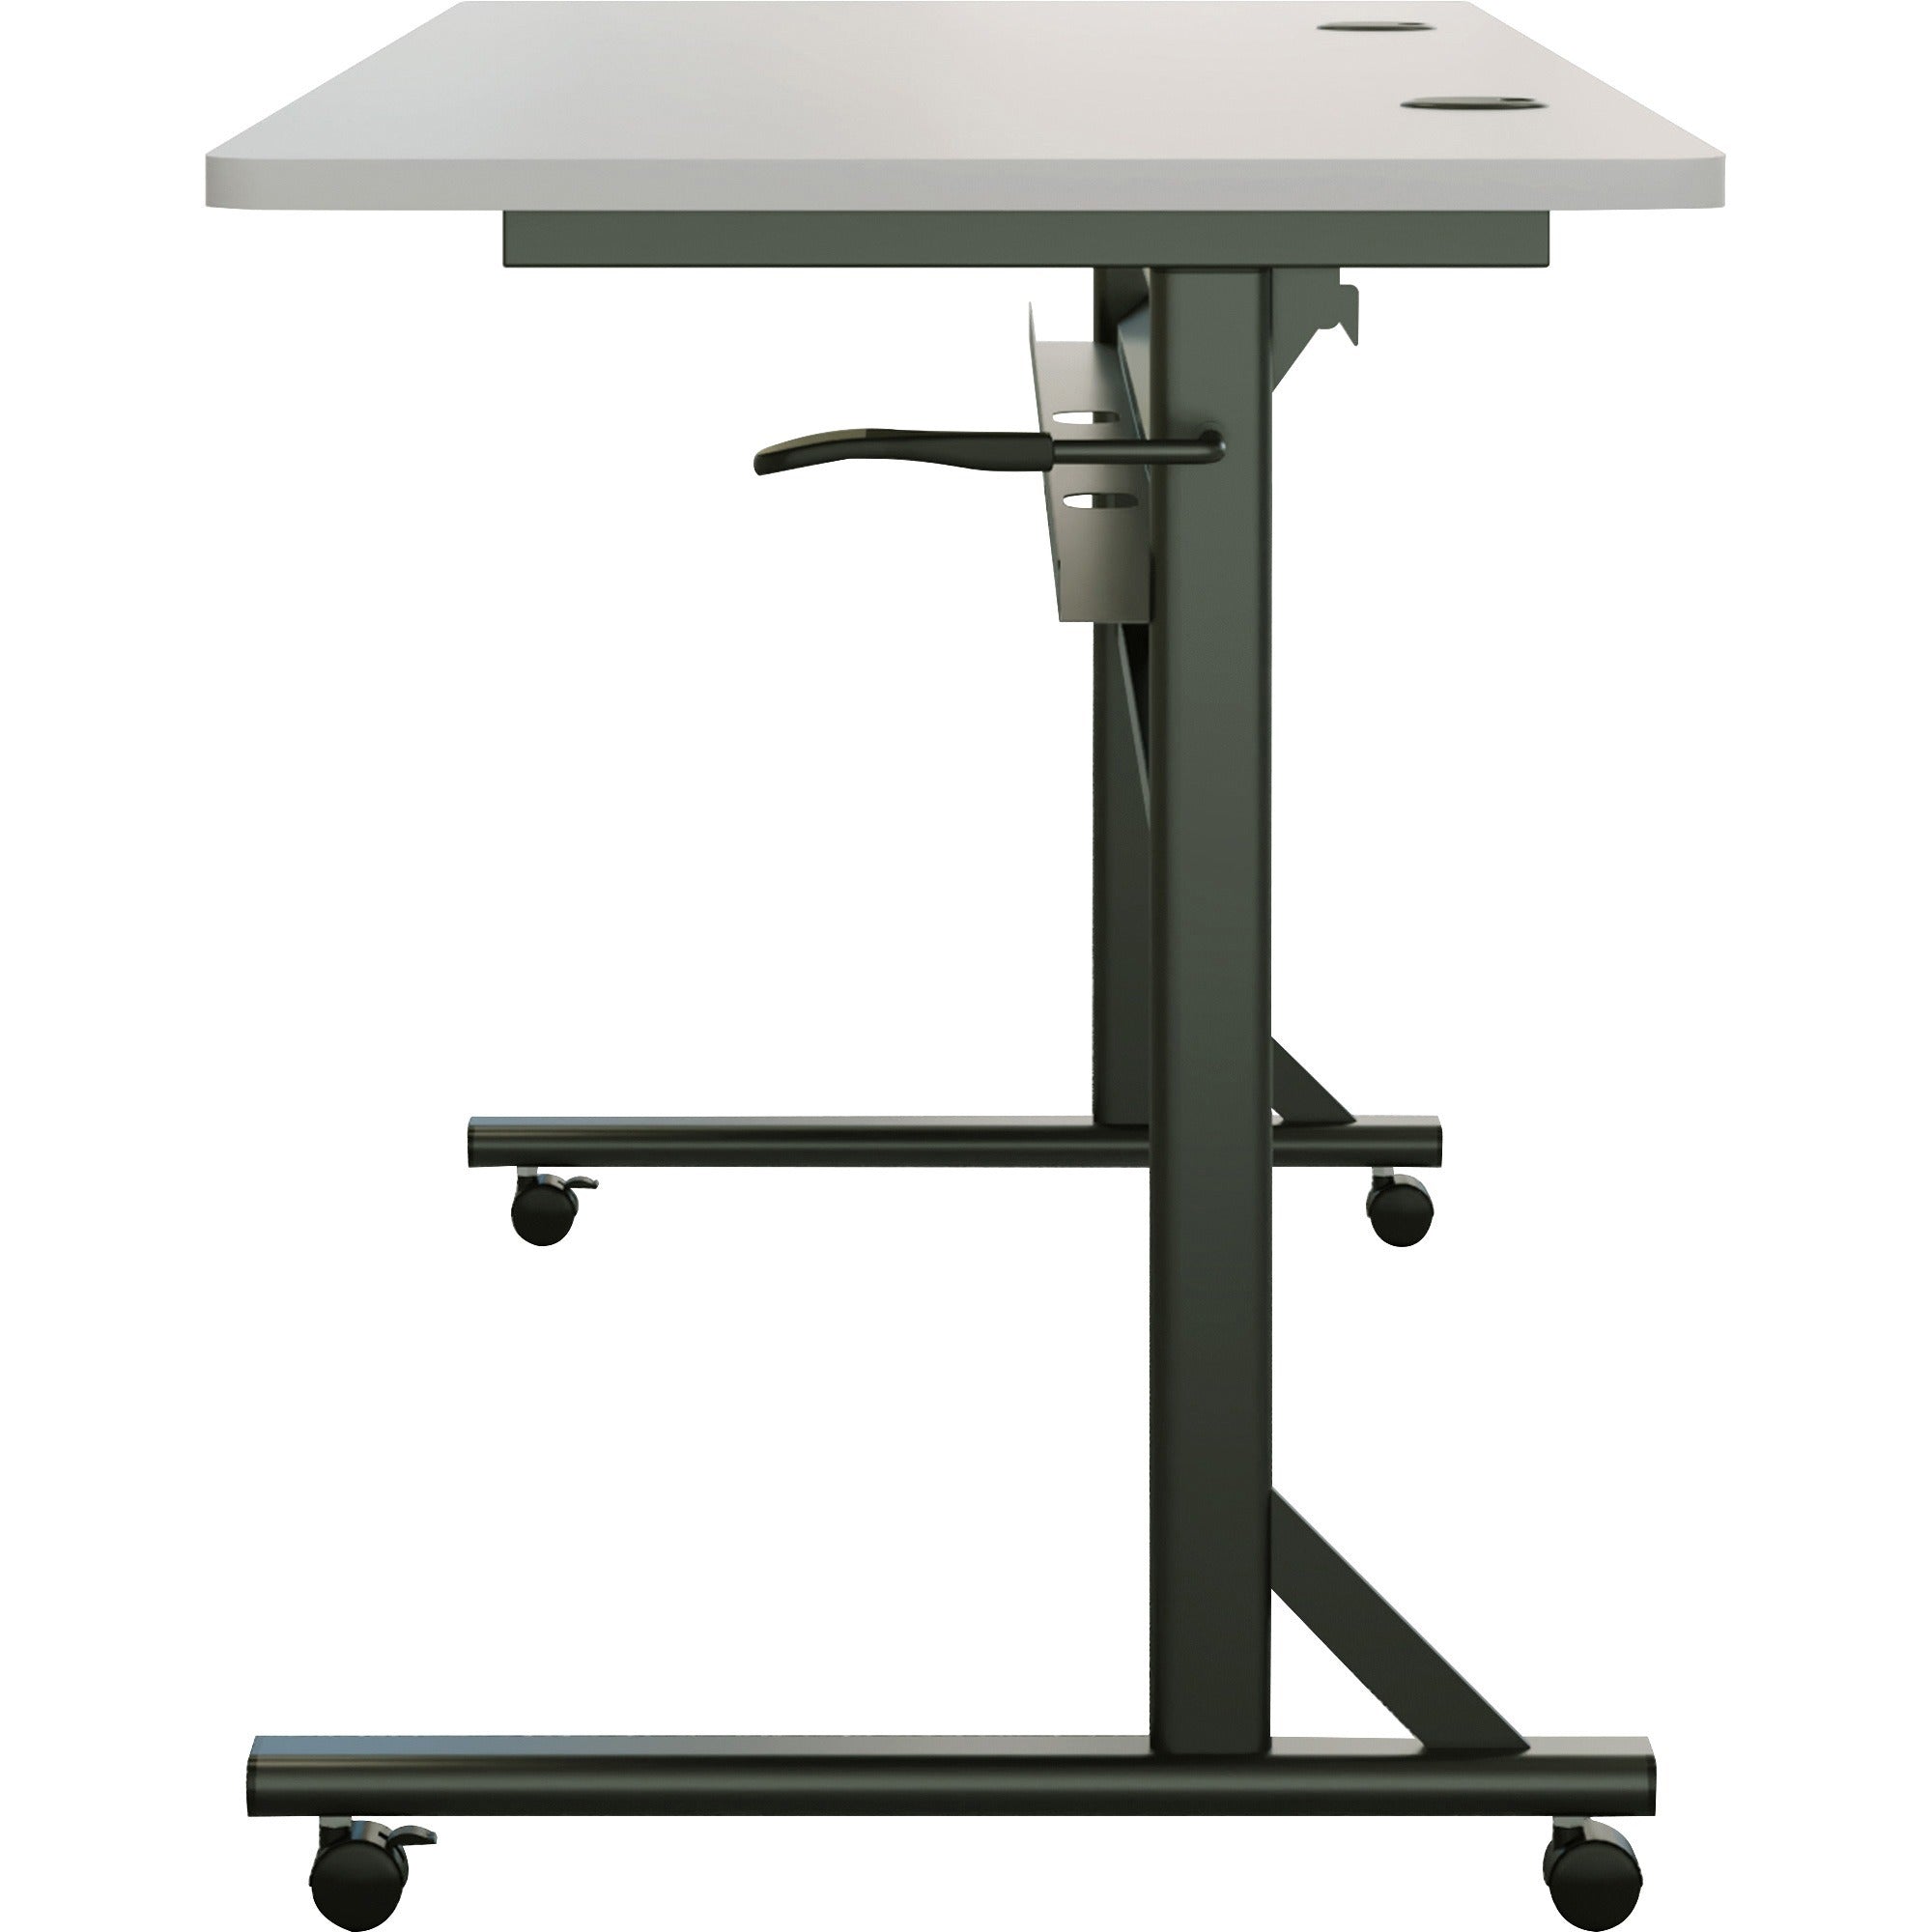 lorell-shift-20-flip-and-nesting-mobile-table-for-table-toplaminated-rectangle-top-60-table-top-length-x-24-table-top-width-x-1-table-top-thickness-2950-height-assembly-required-gray-1-each_llr60766 - 6